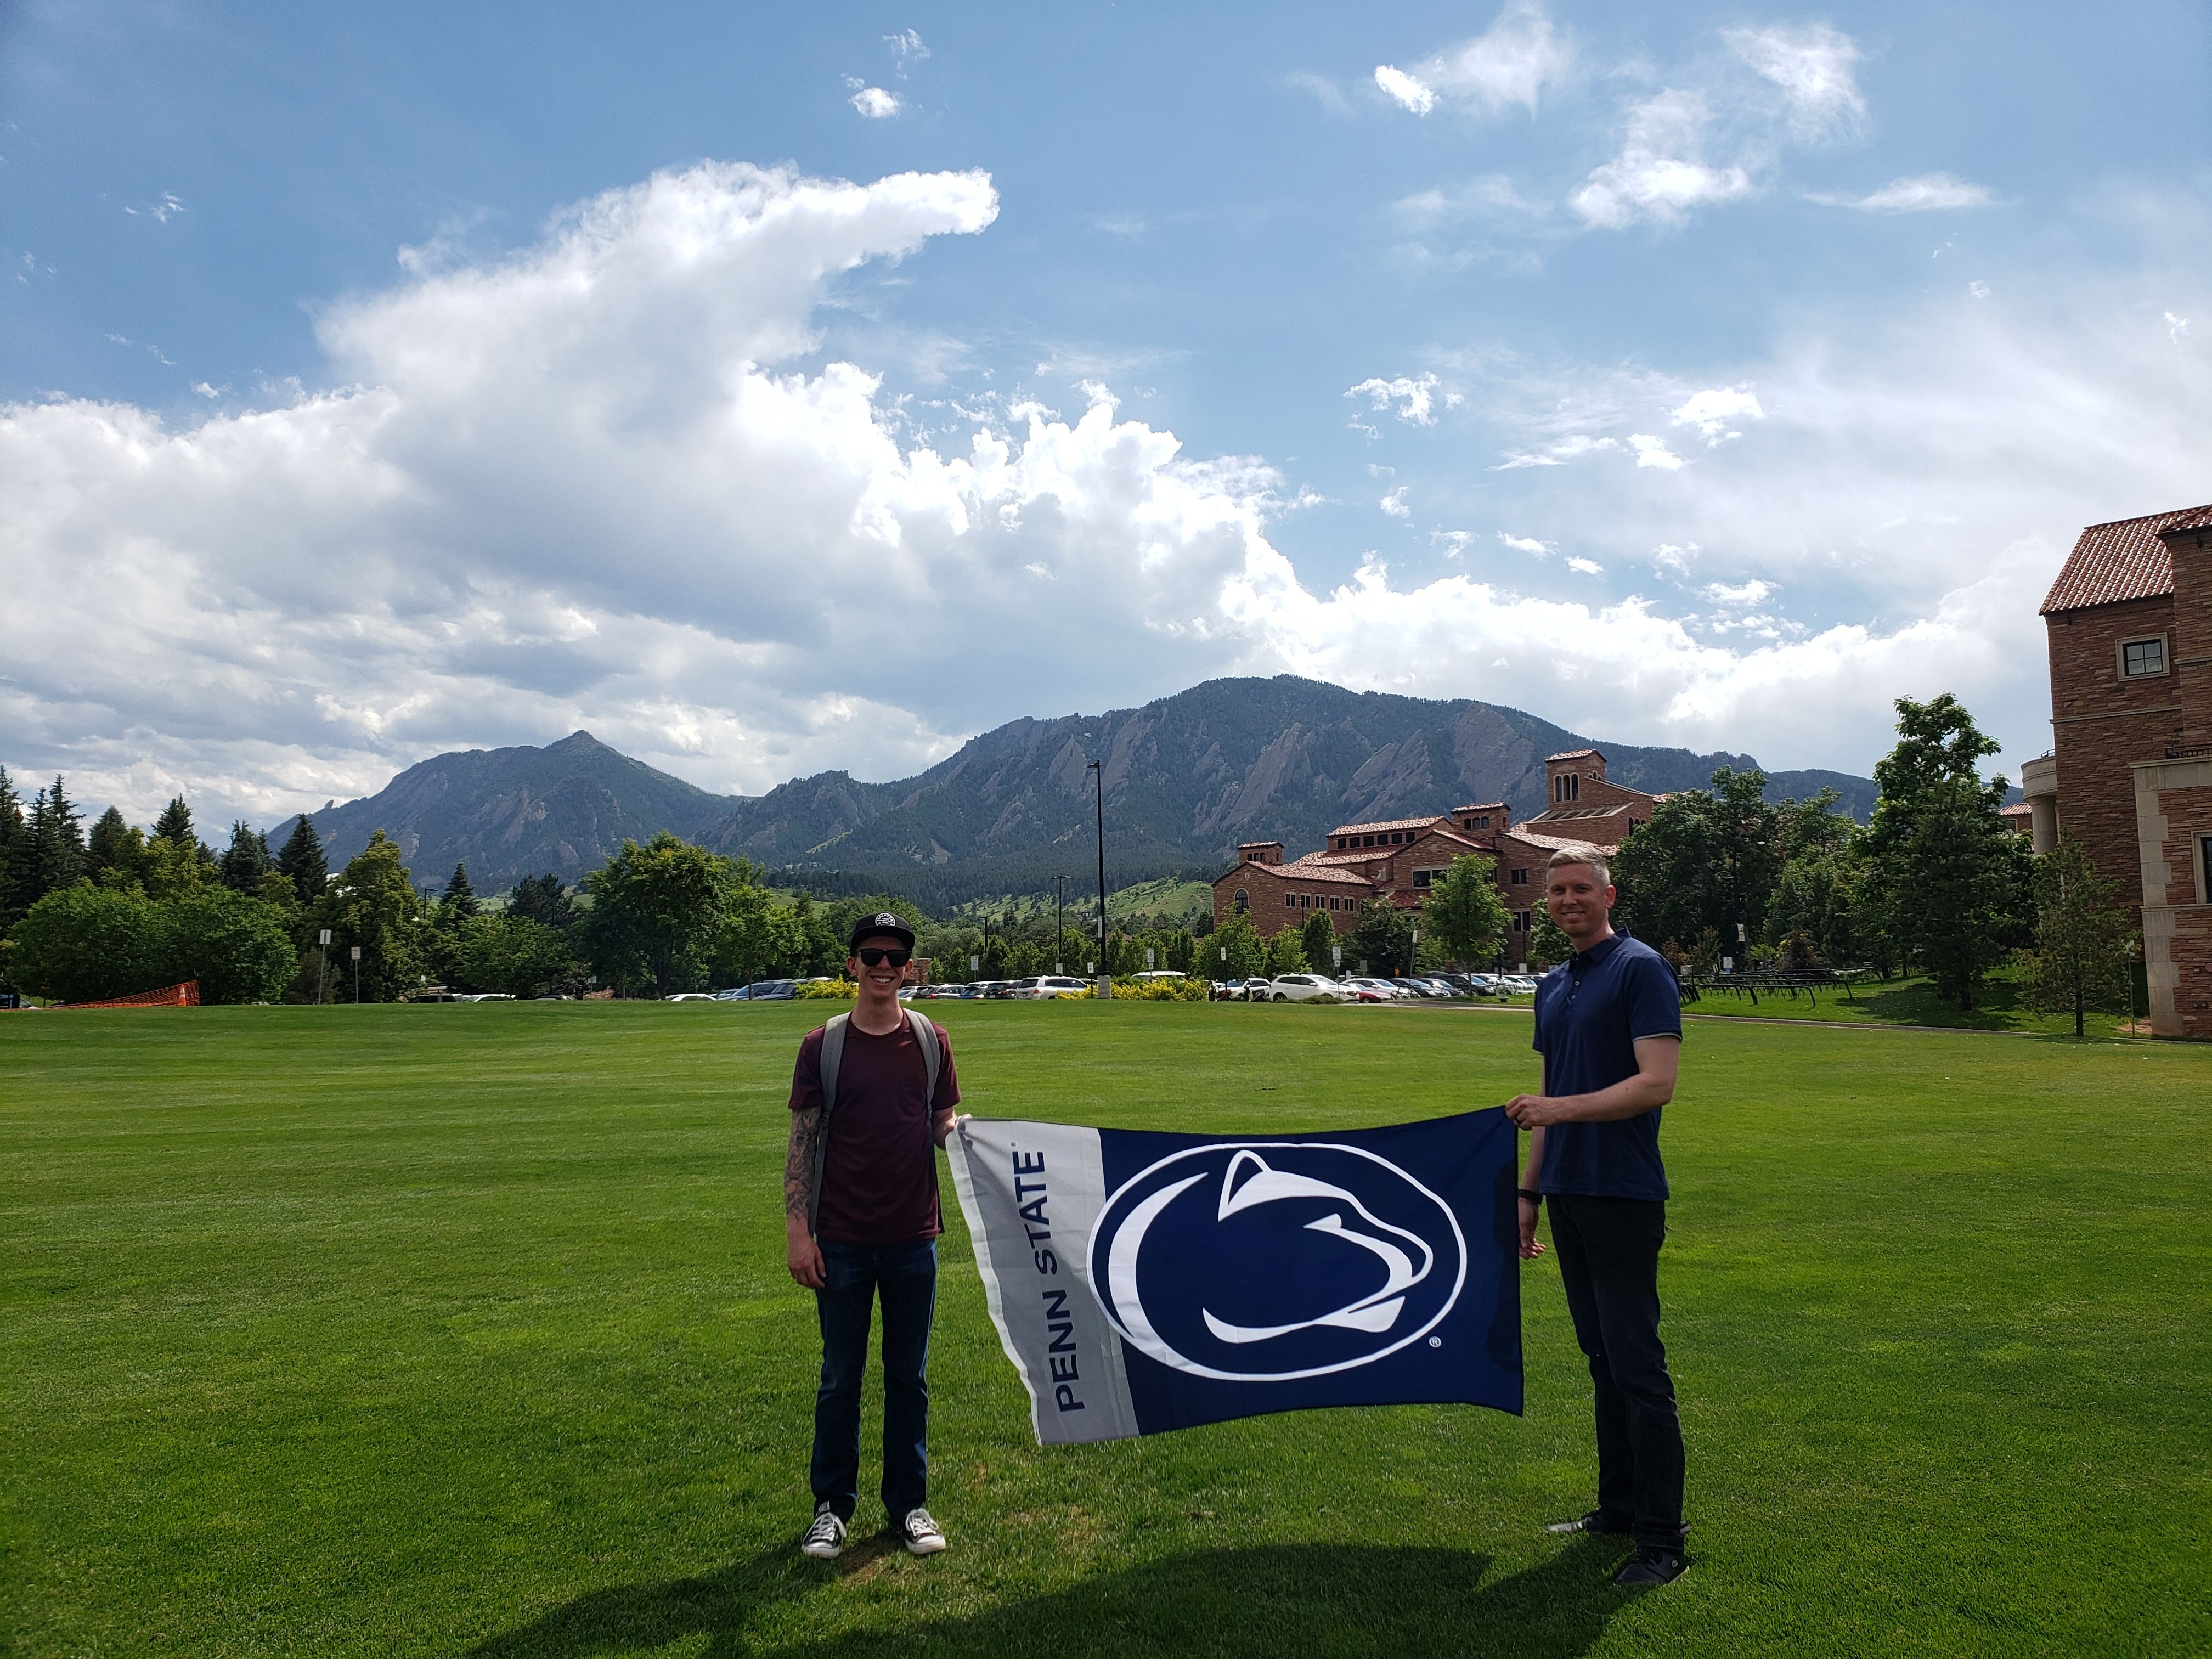 ESP students, Mason Taylor and Joshua Andresky stand on the lawn of the UC Boulder campus holding a PSU flag